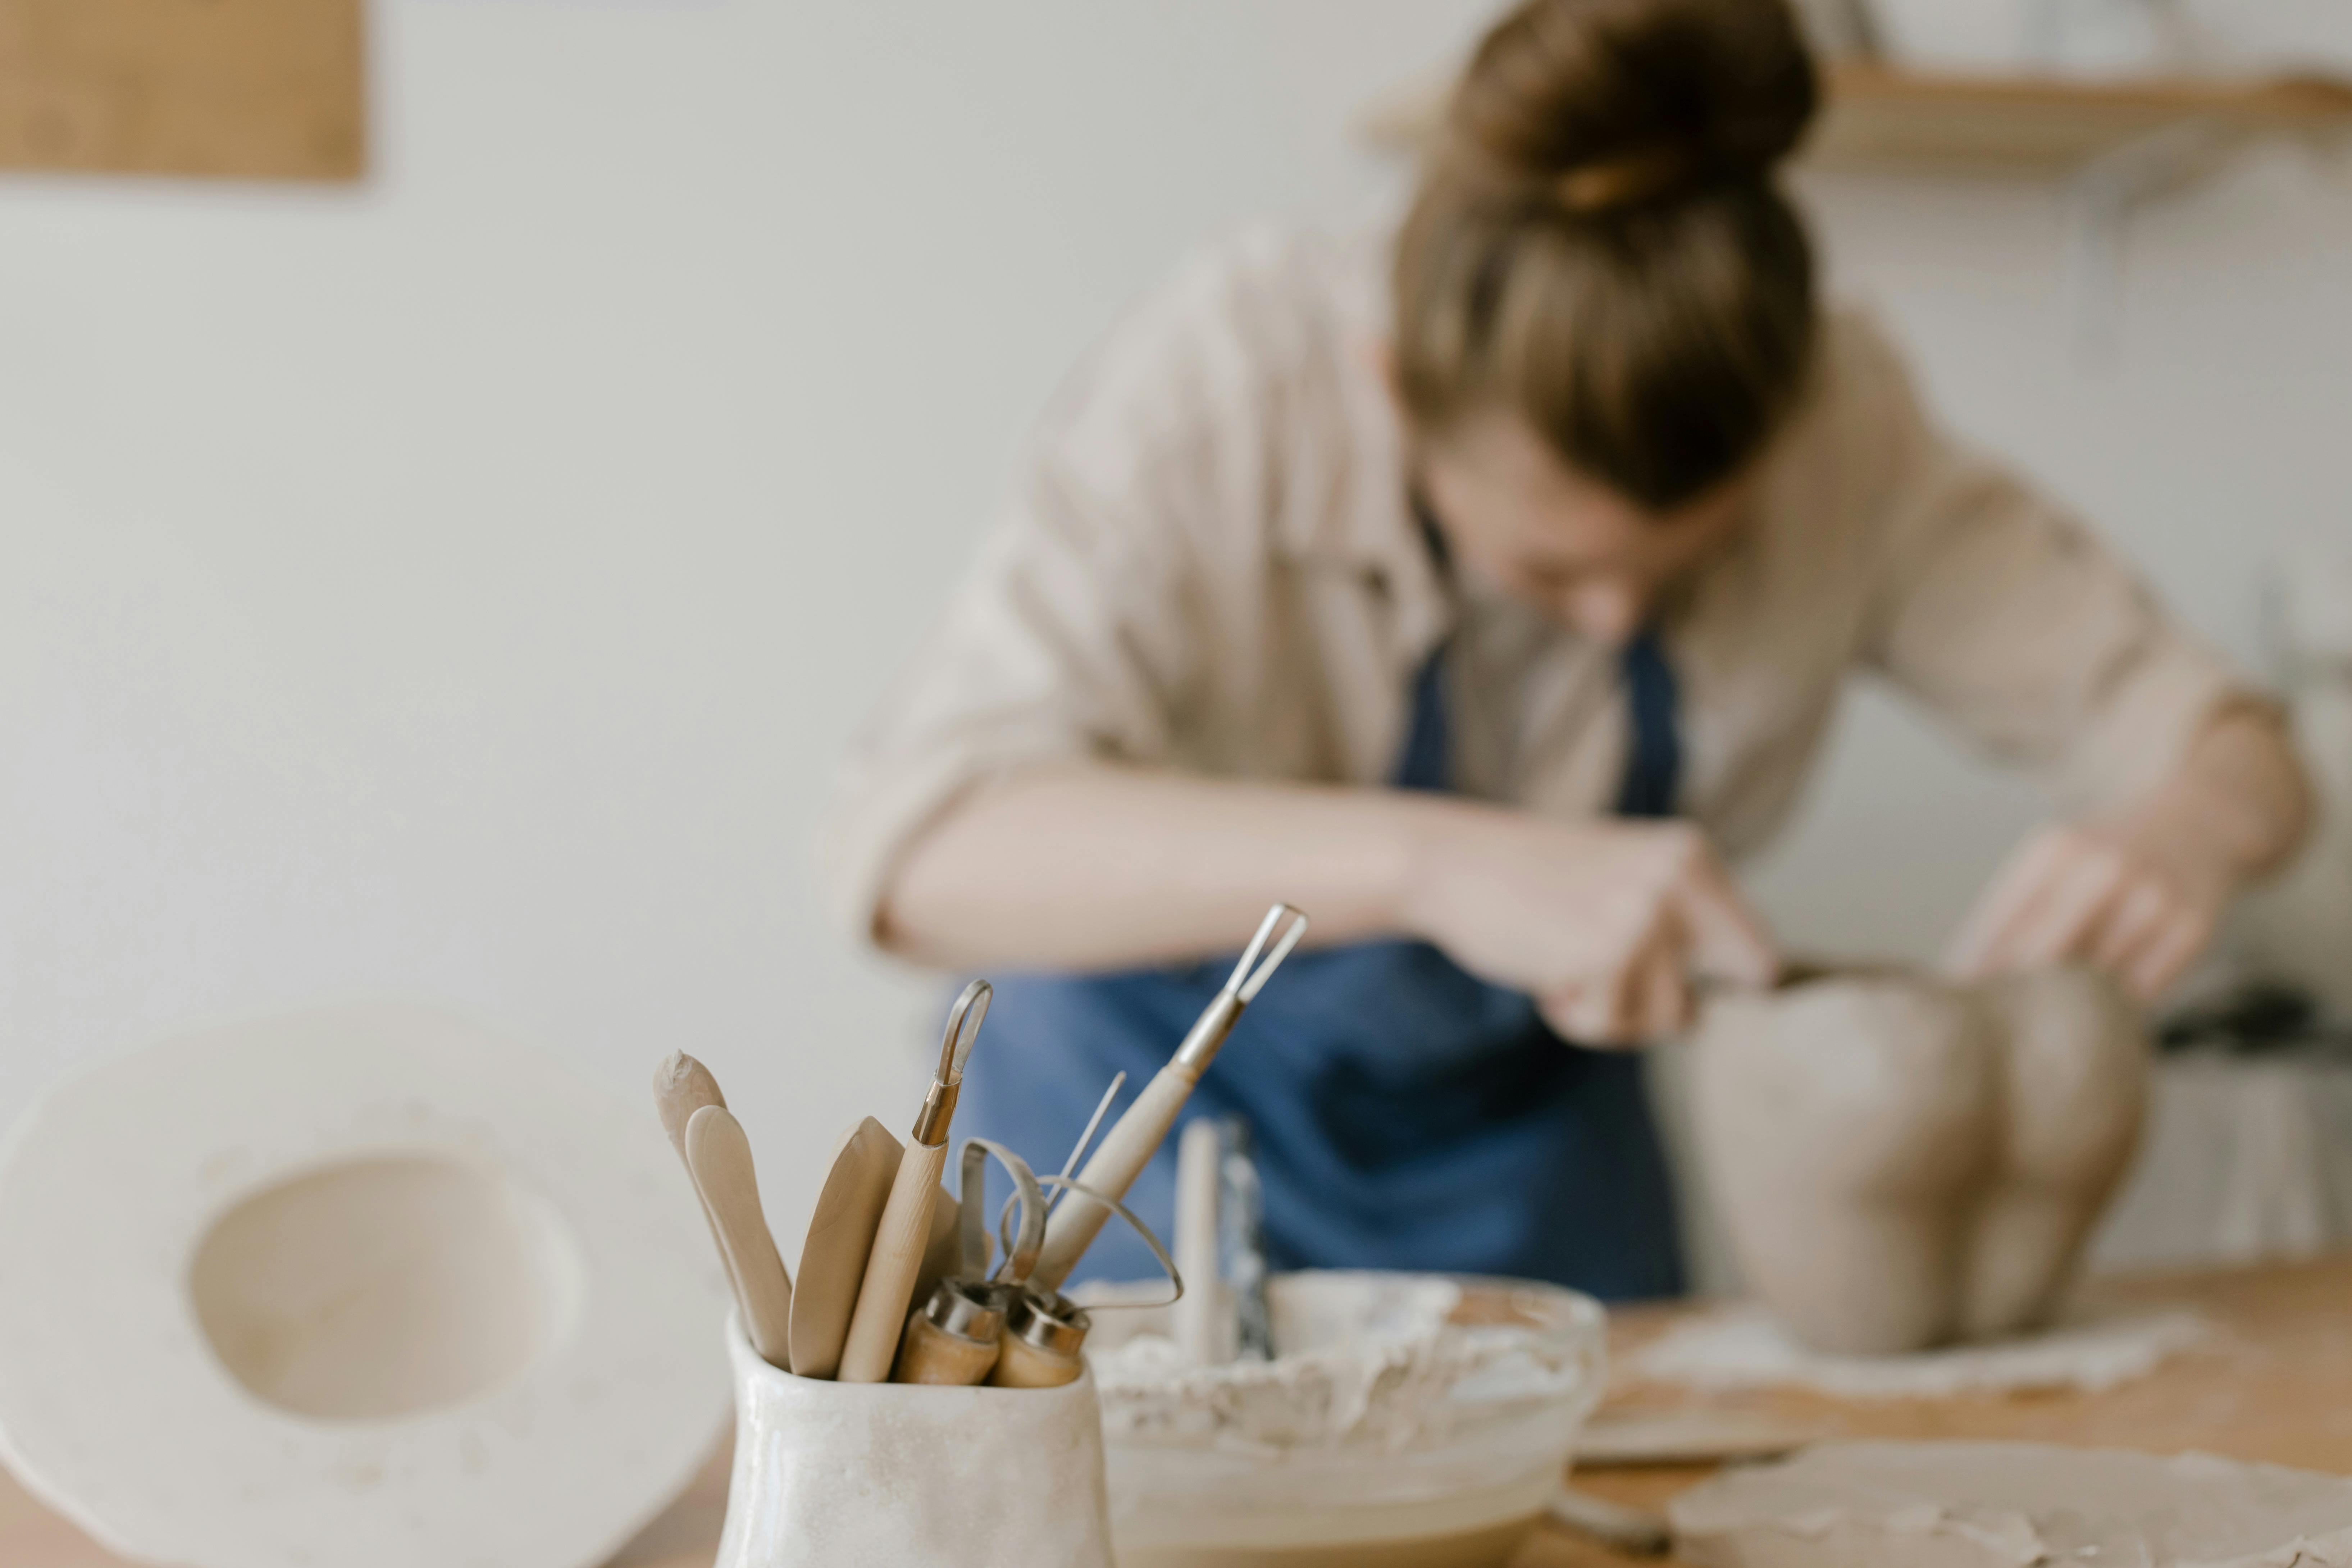 Smiling Young Woman Working in Art Pottery Studio Stock Image - Image of  clay, adult: 228371311